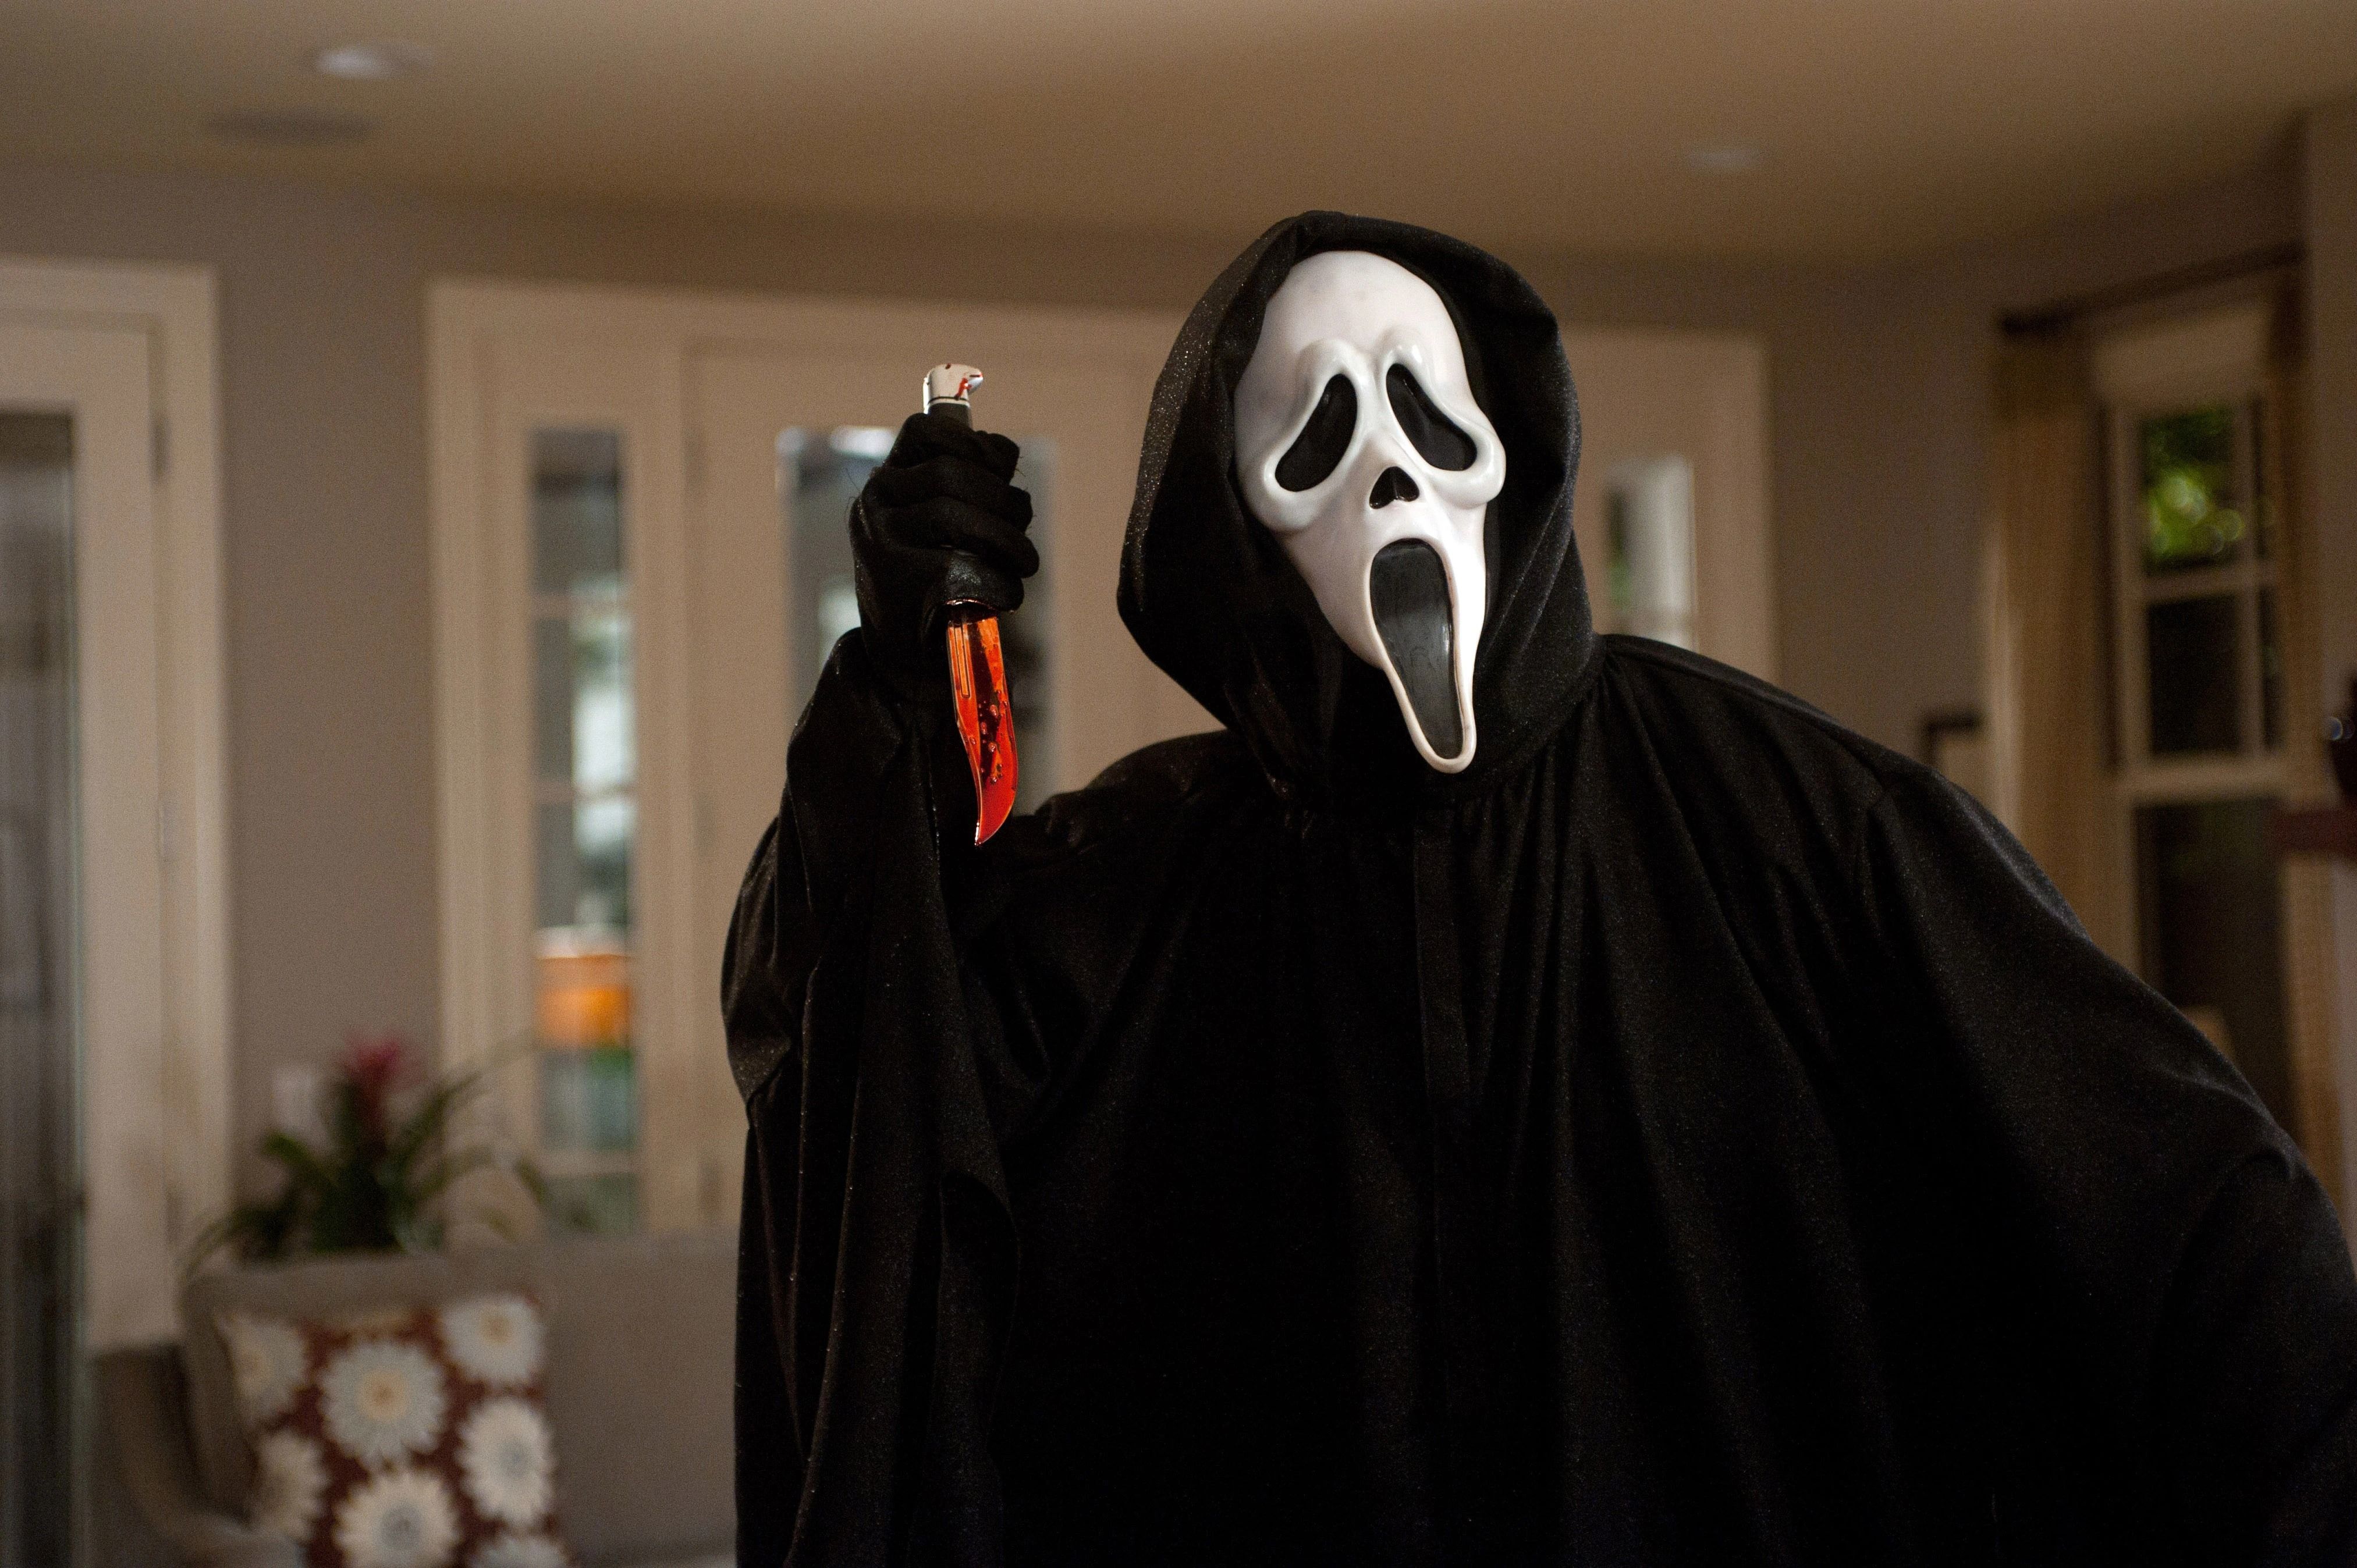 Does Scream 6 have a post-credits end scene? And if so, how many